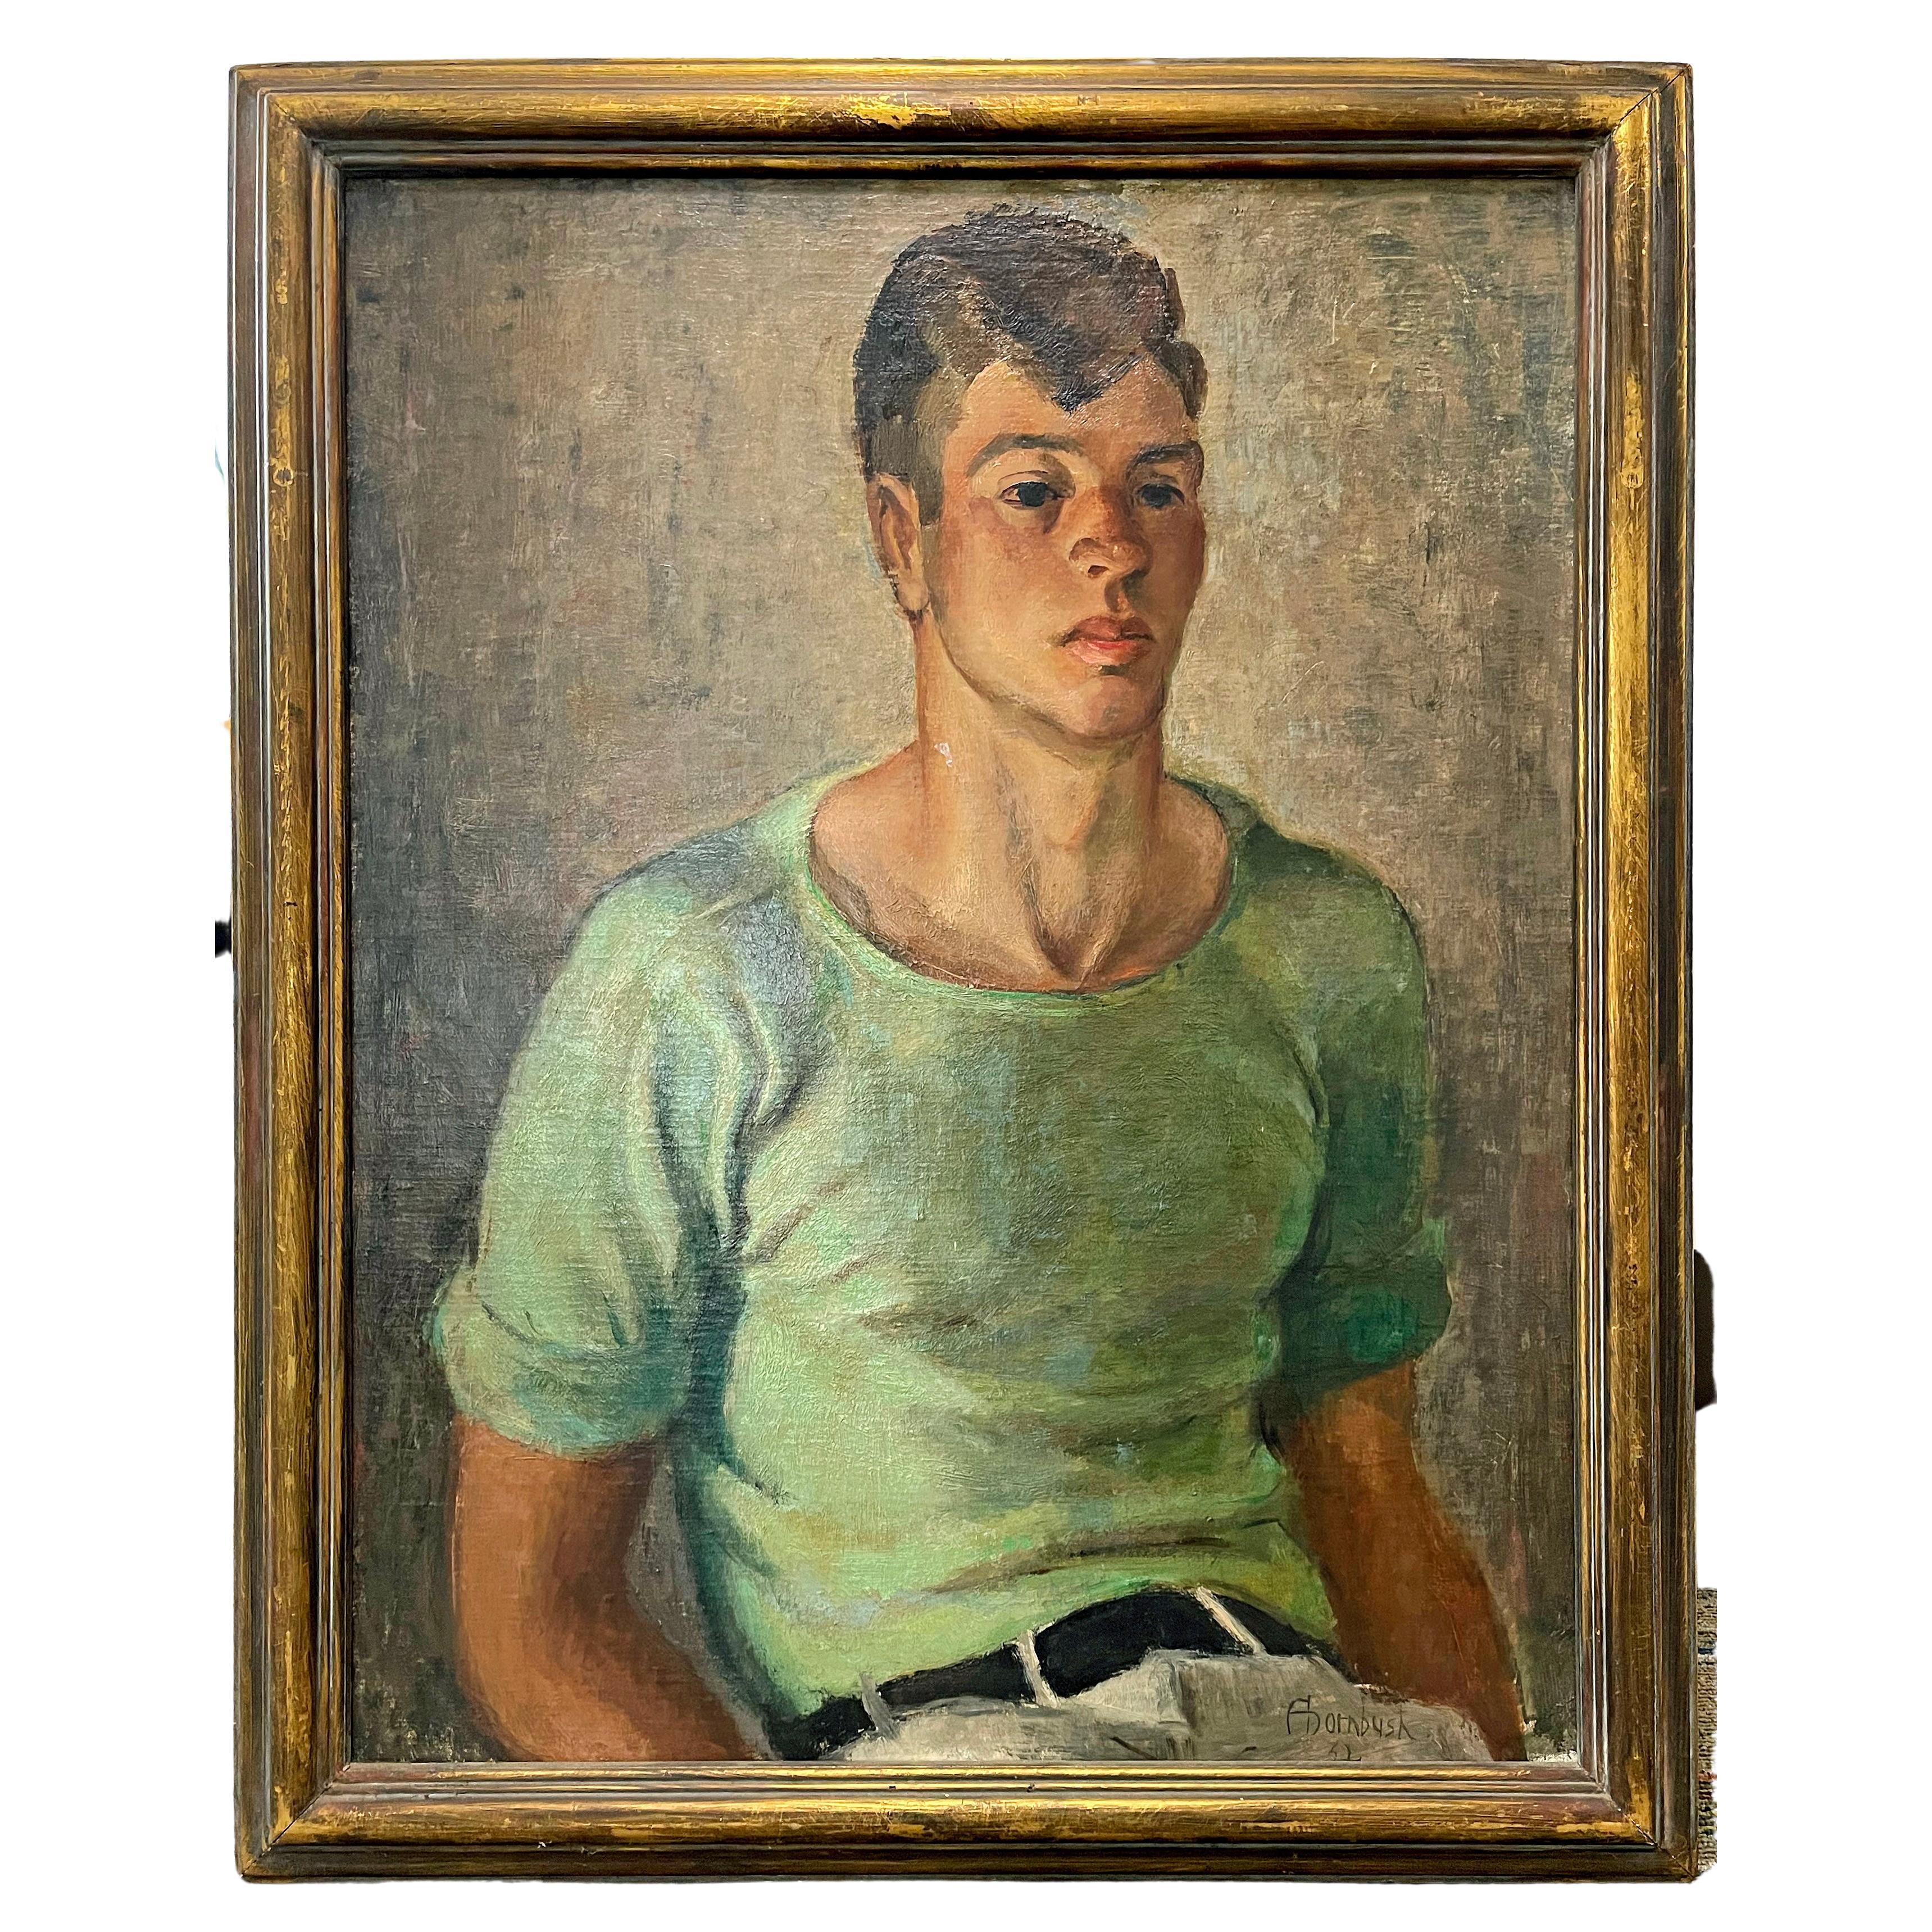 "Young Man in Green Shirt 'Jerry', " by Dornbush, Close Associate of Grant Wood